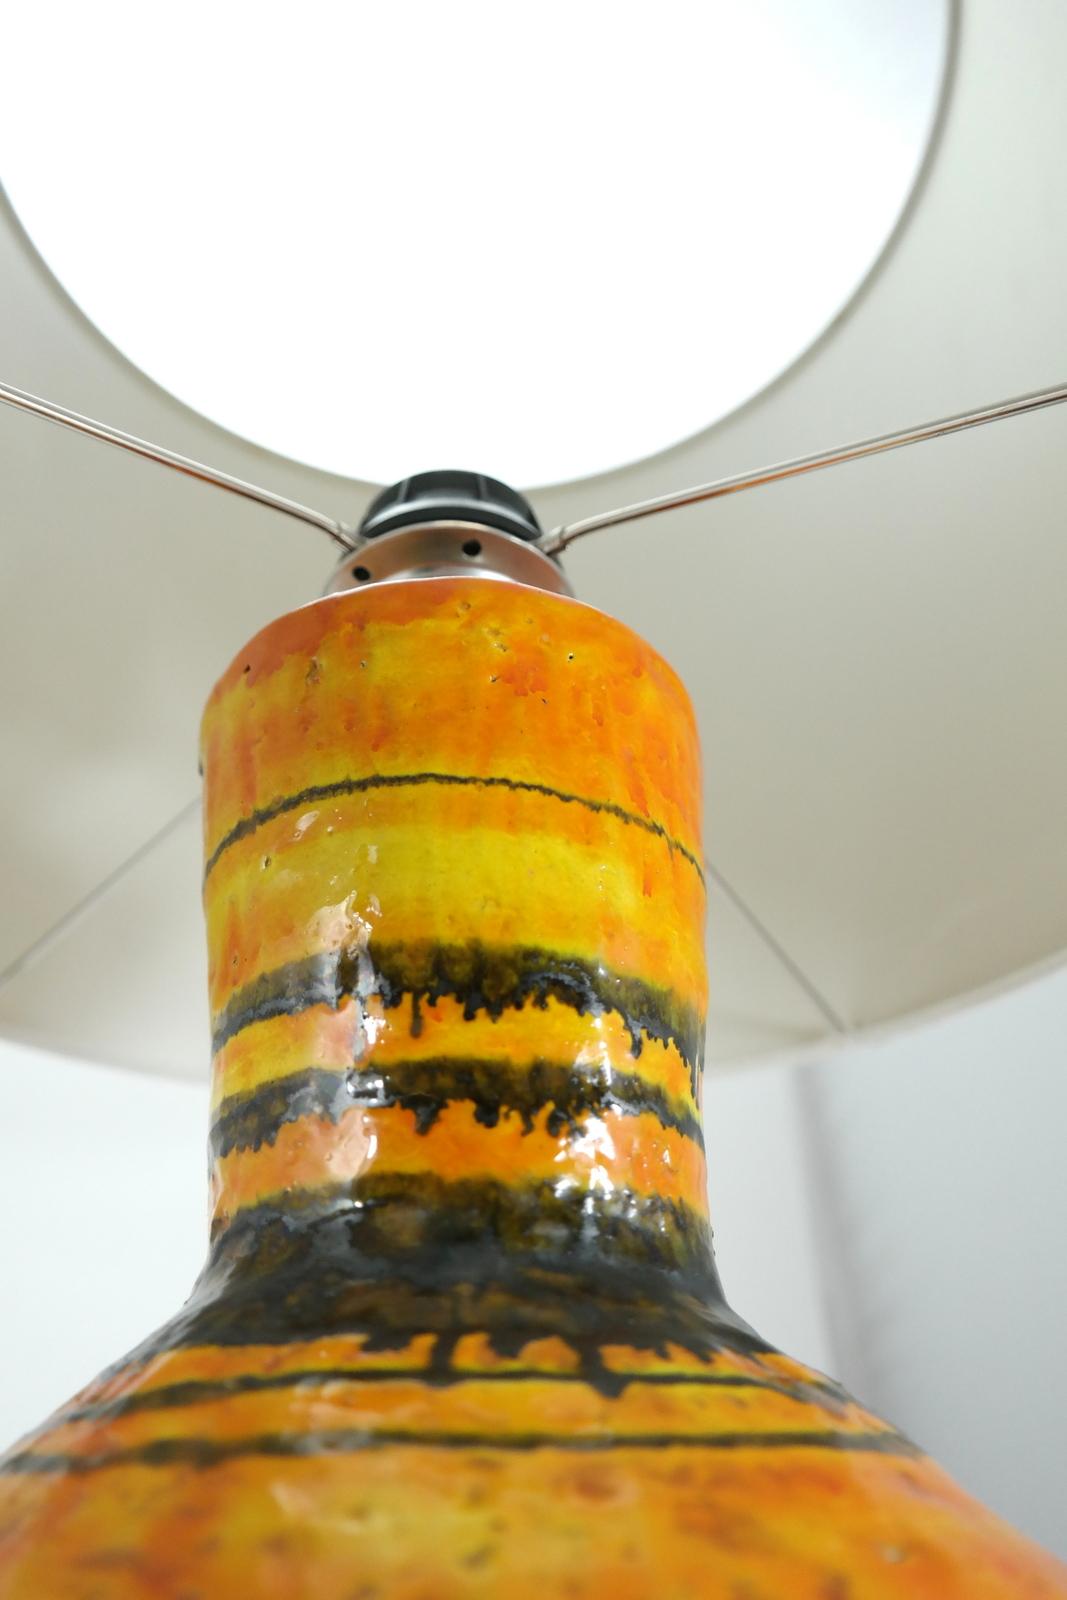 Large Midcentury Ceramic Table Lamp by Zsuzsa Heller, 1970s For Sale 2